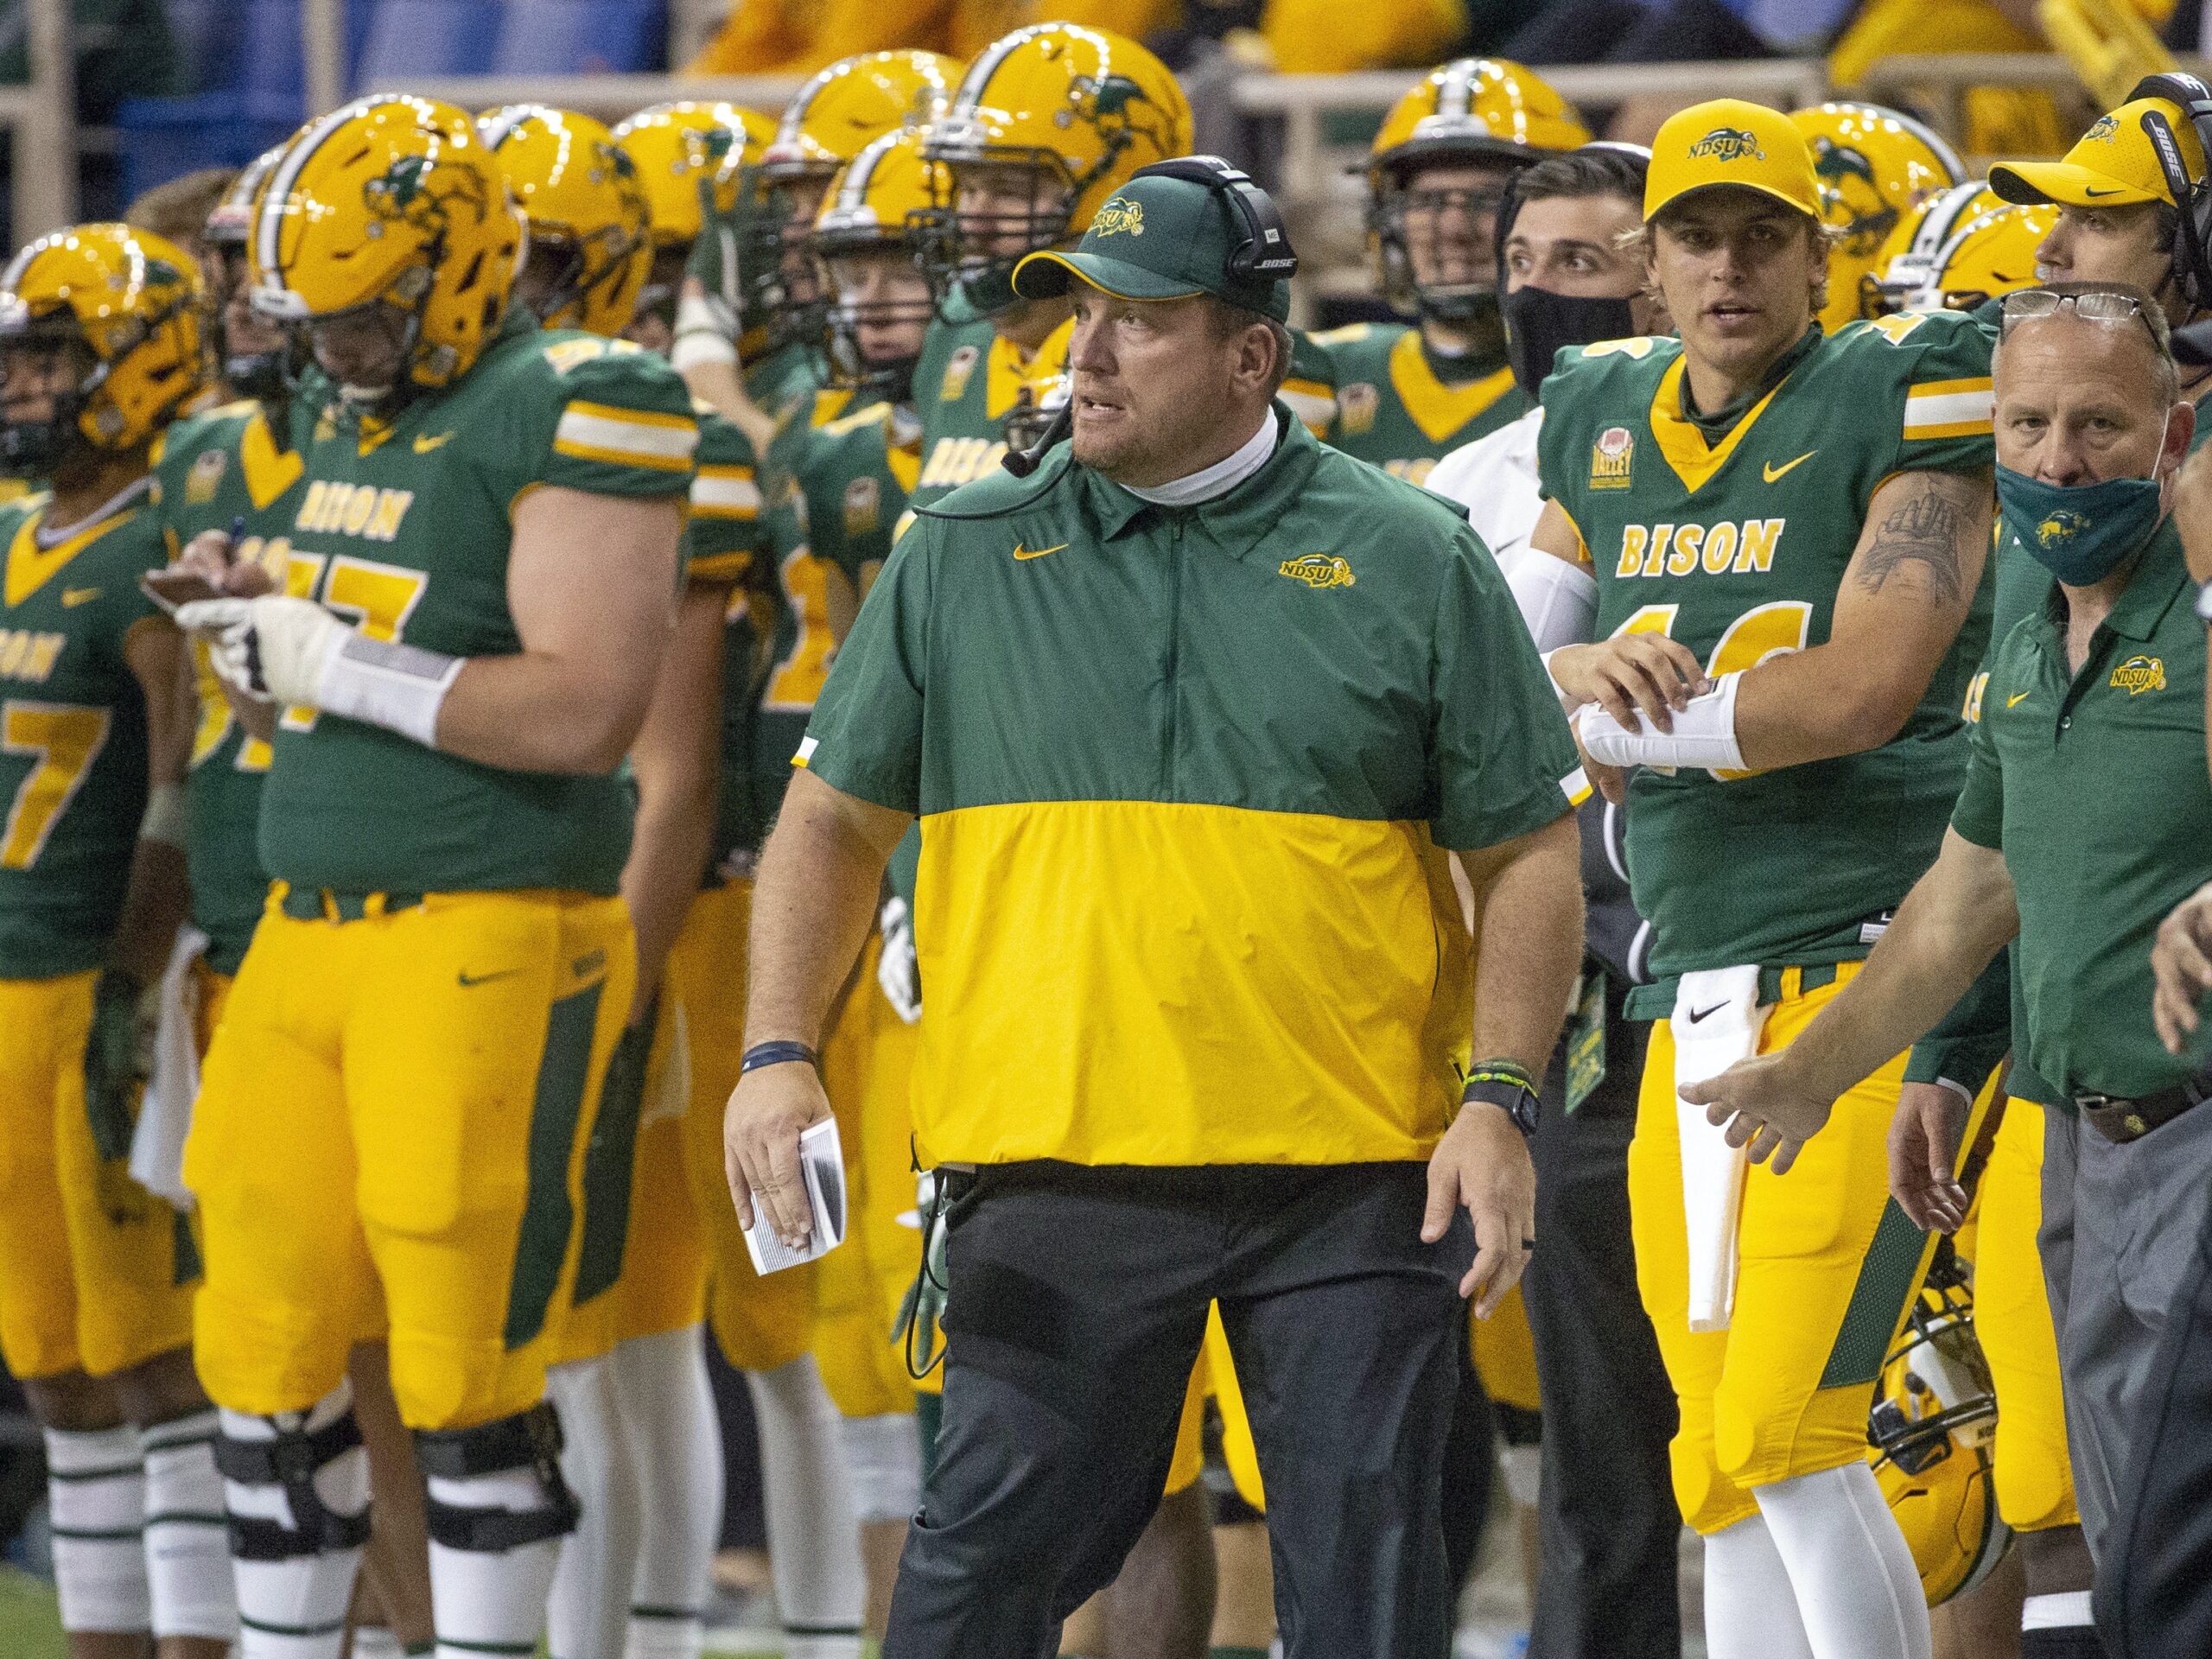 North Dakota State Coach Entz to Resign After Season for USC Assistant’s Position